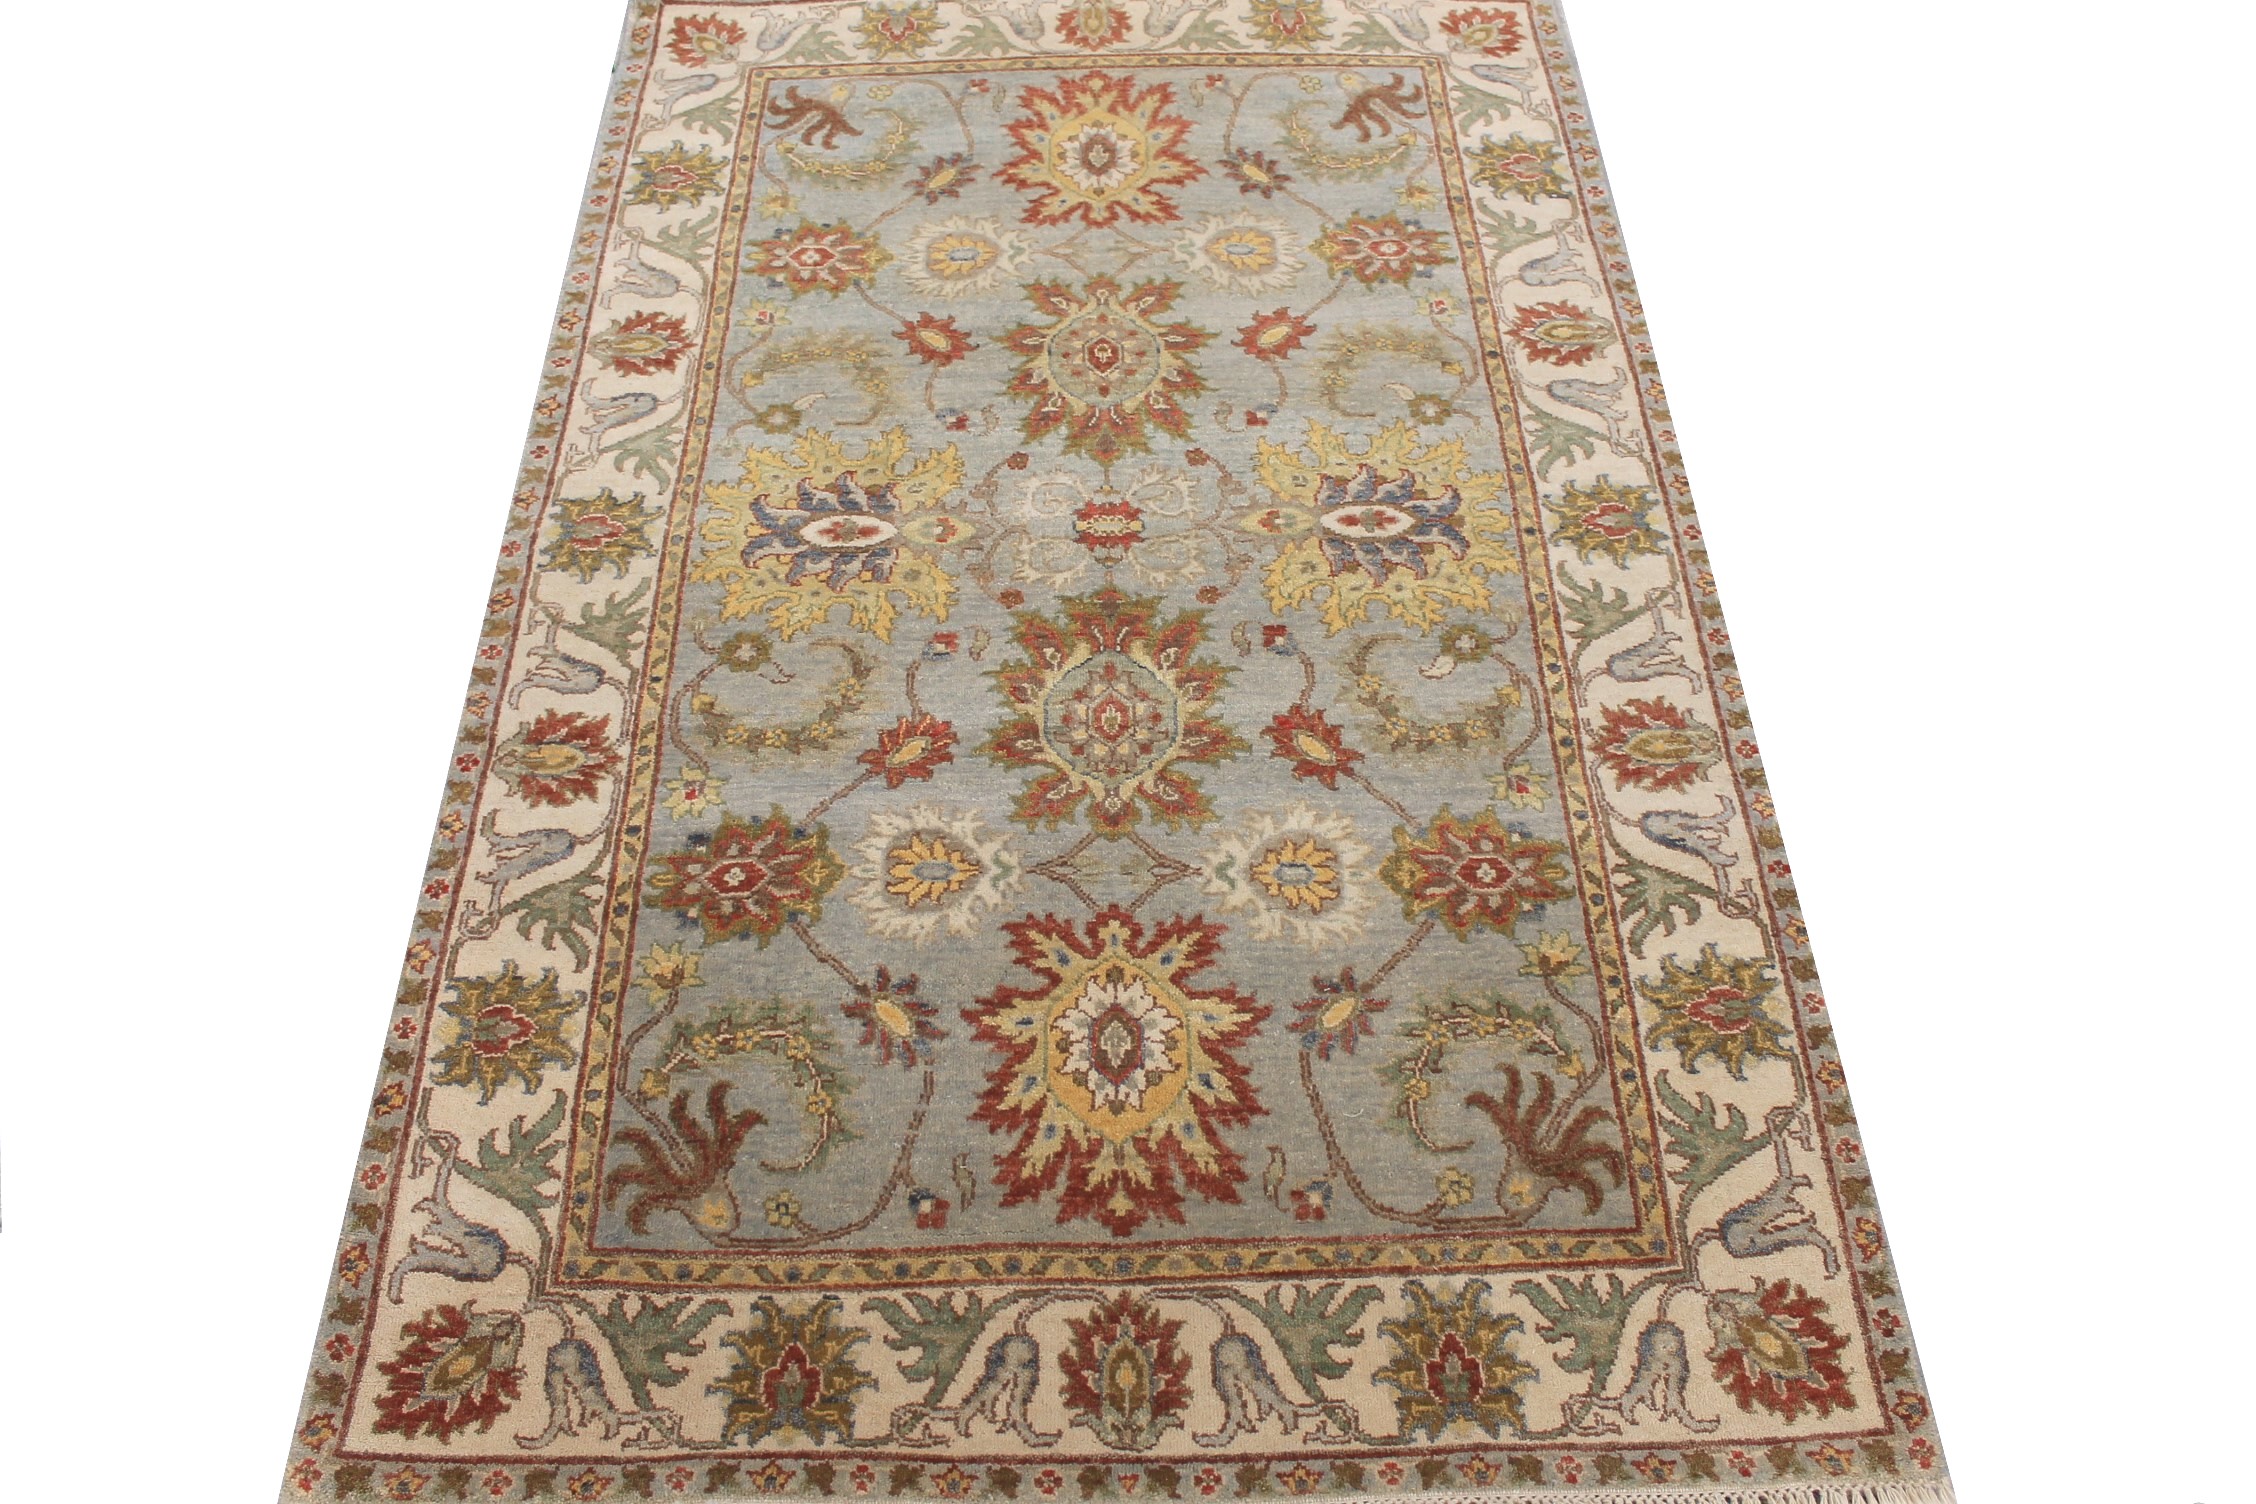 4x6 Traditional Hand Knotted Wool Area Rug - MR026250